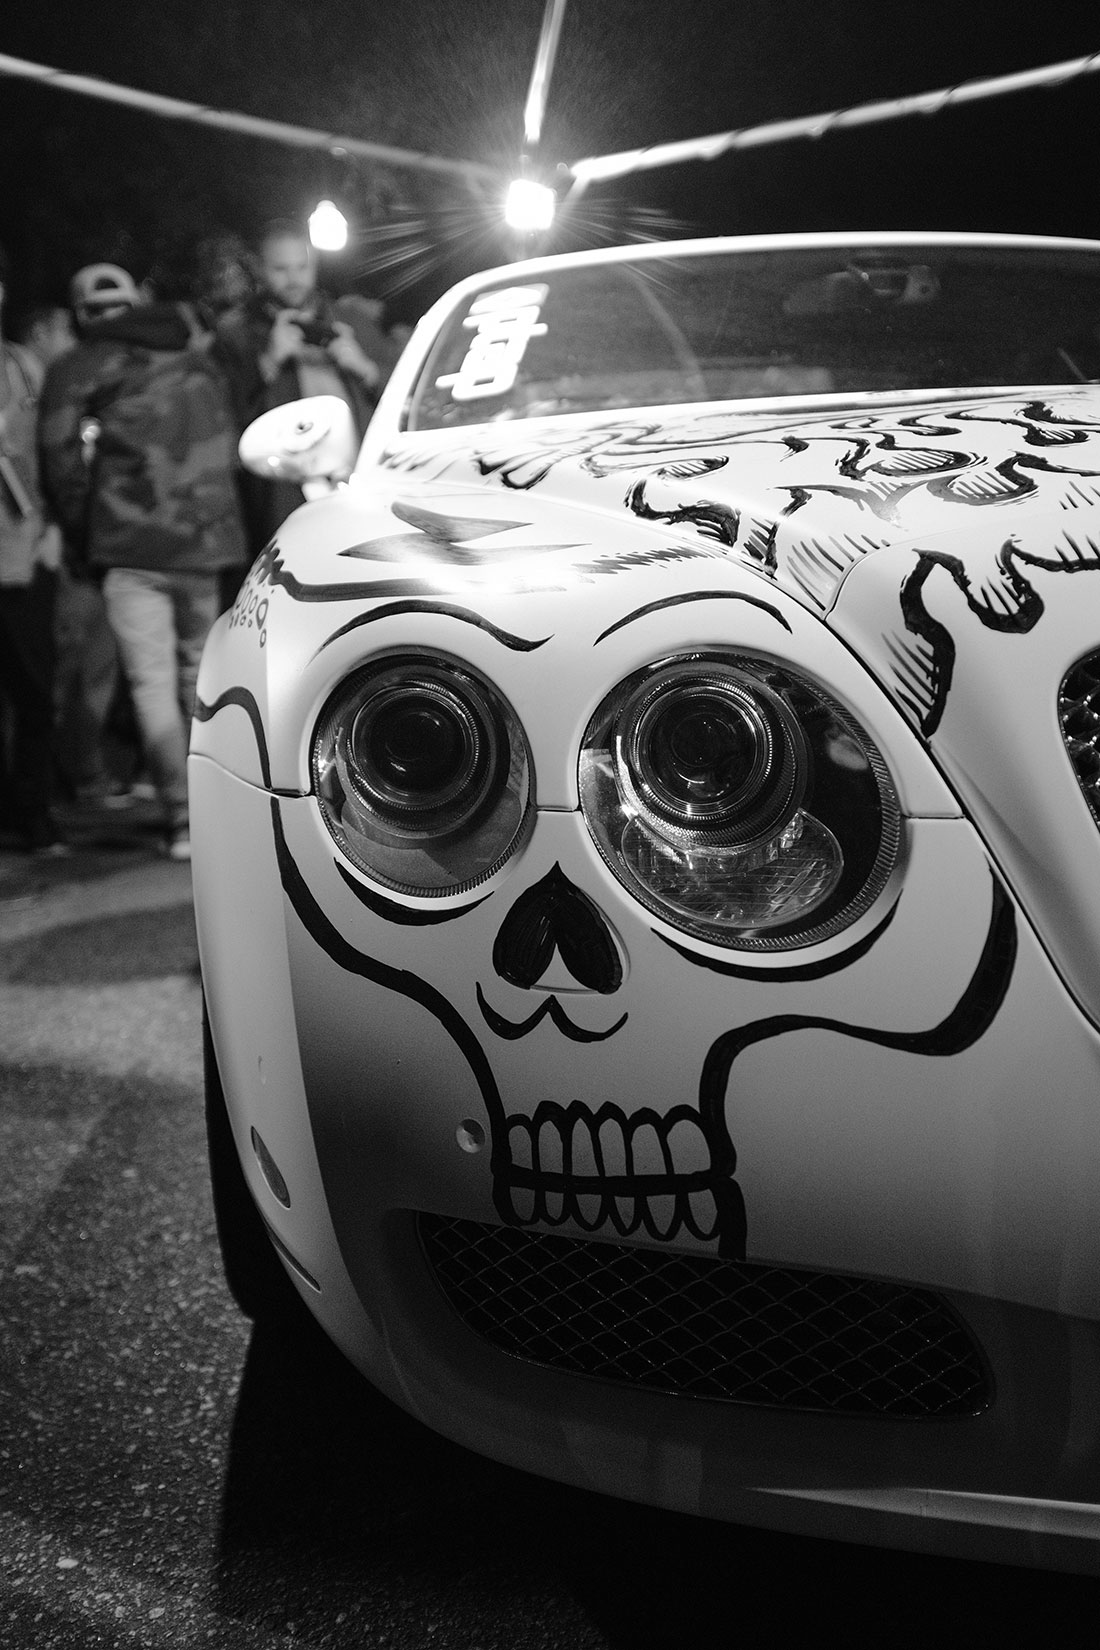  I saw the headlight and thought, "Skull!" Von, Skullmaster, made it awesome. 